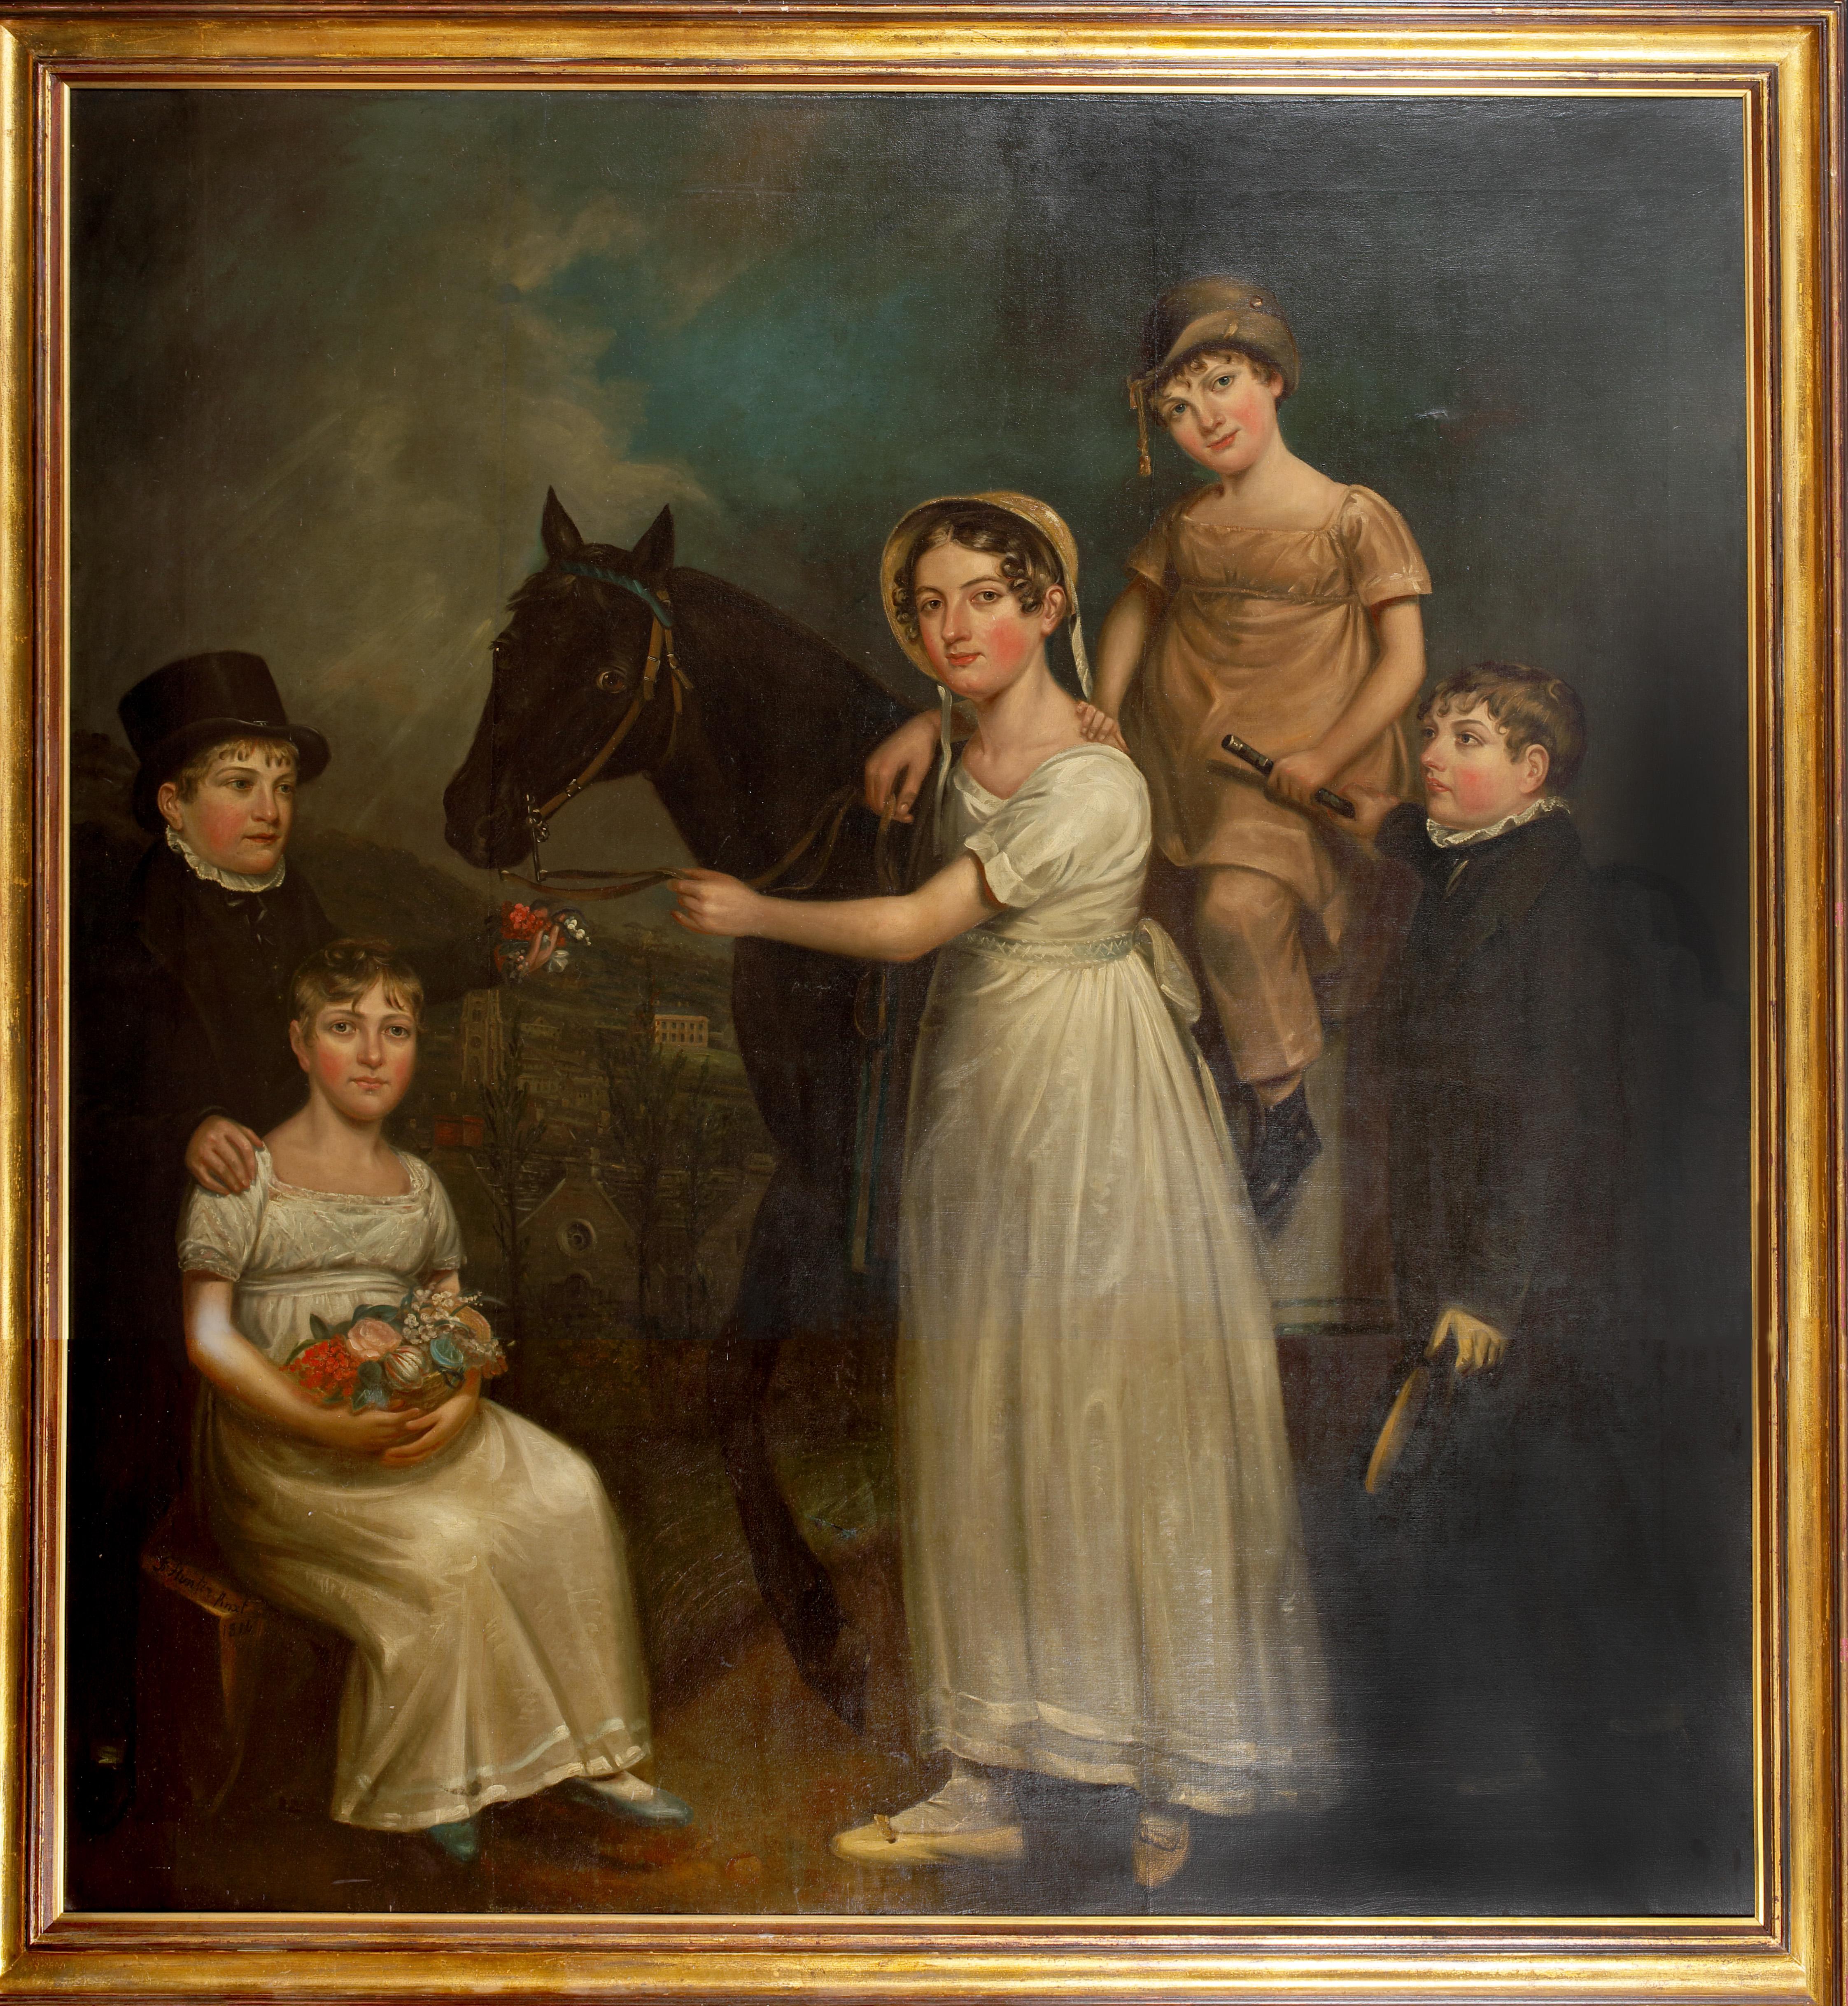 Unknown Portrait Painting - Portrait Of The Fawcett Children Of Bradford, dated 1814  by J. Hunter 